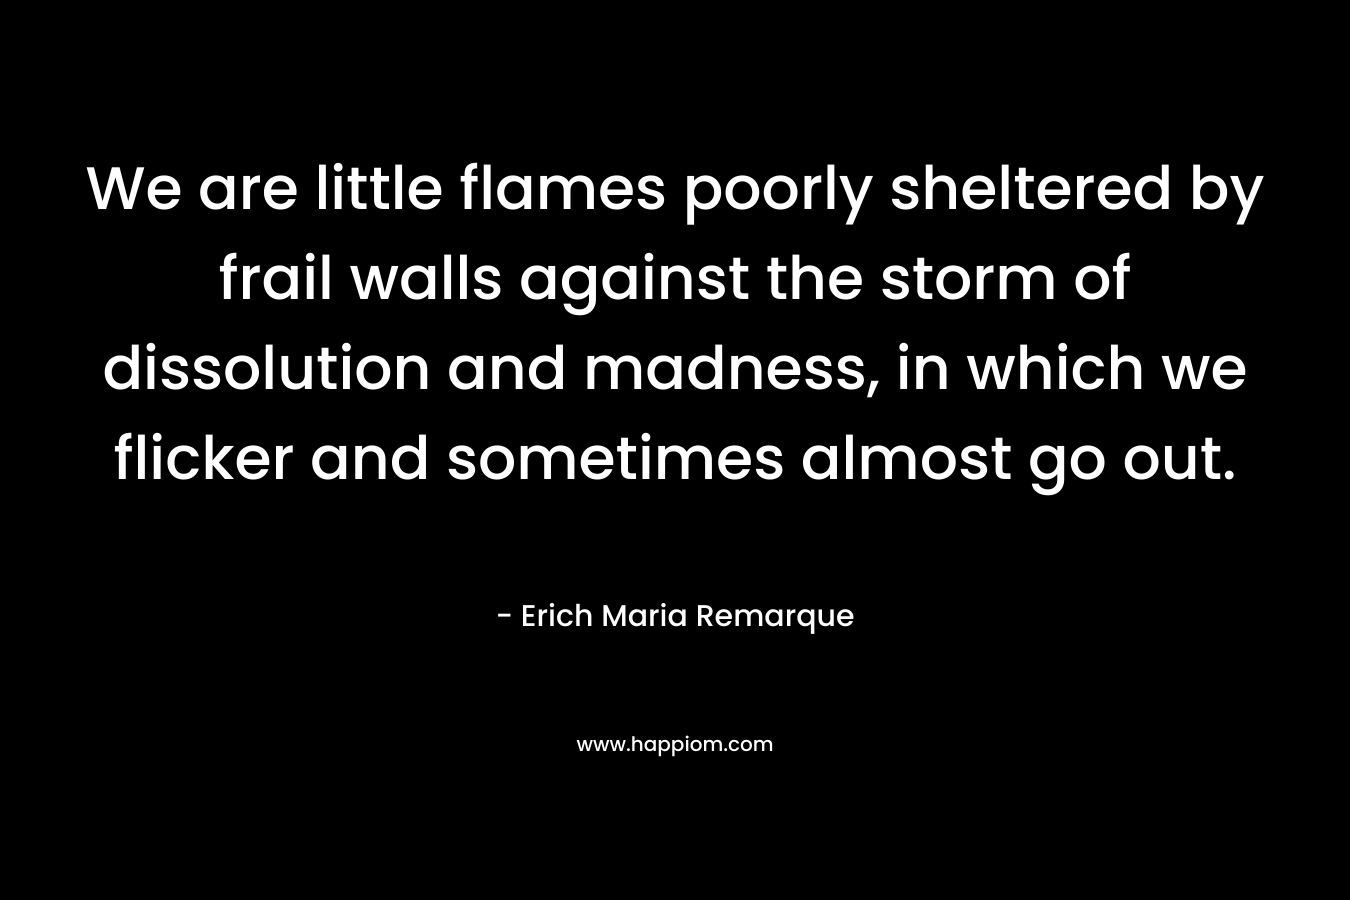 We are little flames poorly sheltered by frail walls against the storm of dissolution and madness, in which we flicker and sometimes almost go out. – Erich Maria Remarque